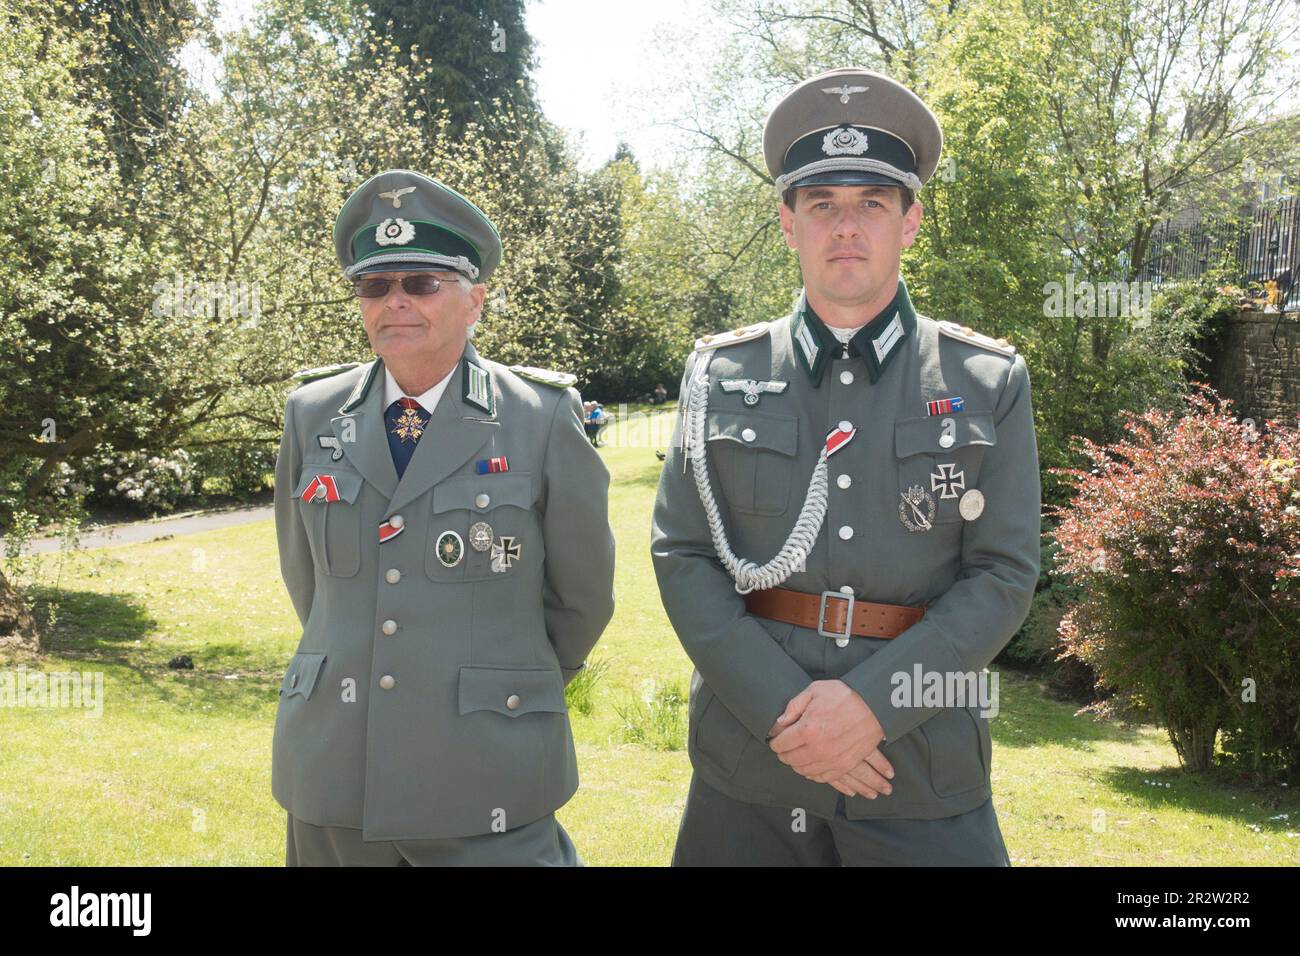 Haworth, England, UK, 21st May 2023. Haworth 1940s weekend is a popular annual event attracting people who dress in period costume. Two men dressed in german army uniforms. The Haworth 1940s weekend organisers have requested that people do not wear german Army uniforms. Credit: Paul Thompson/Alamy Live News. Stock Photo